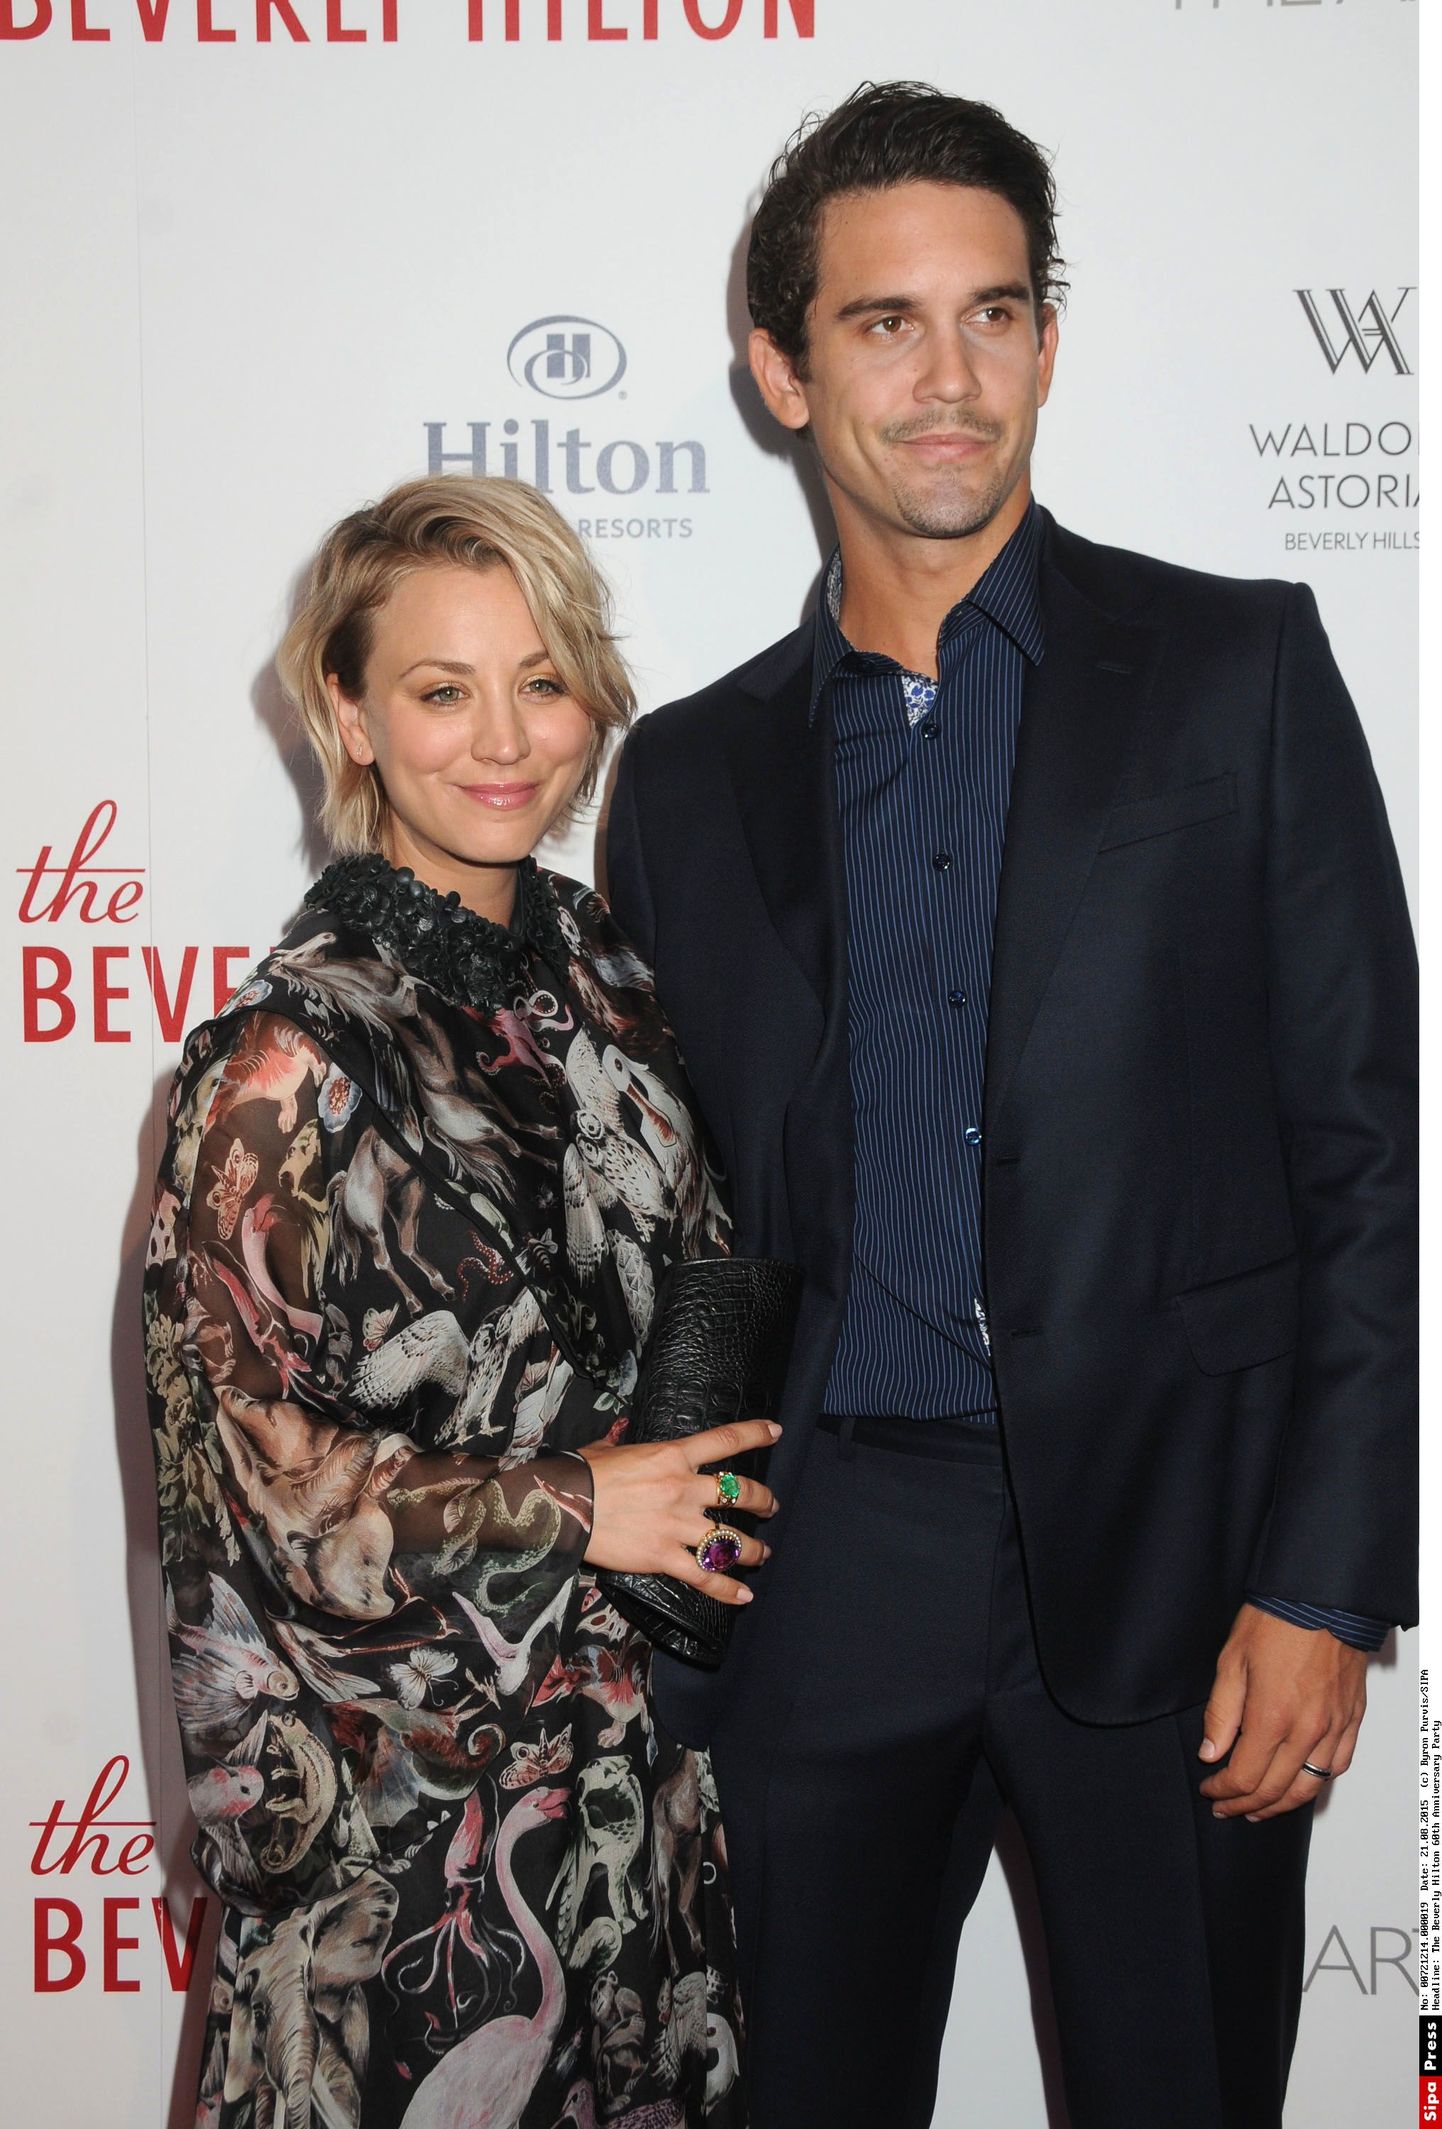 21 August 2015 - Beverly Hills, California - Kaley Cuoco, Ryan Sweeting. The Beverly Hilton 60th Anniversary Party held at The Beverly Hilton Hotel. Photo Credit: Byron Purvis/AdMedia/ADMEDIA_adm_BevHilton6thAnniv_BP_019/Credit:Byron Purvis/SIPA/1508220714